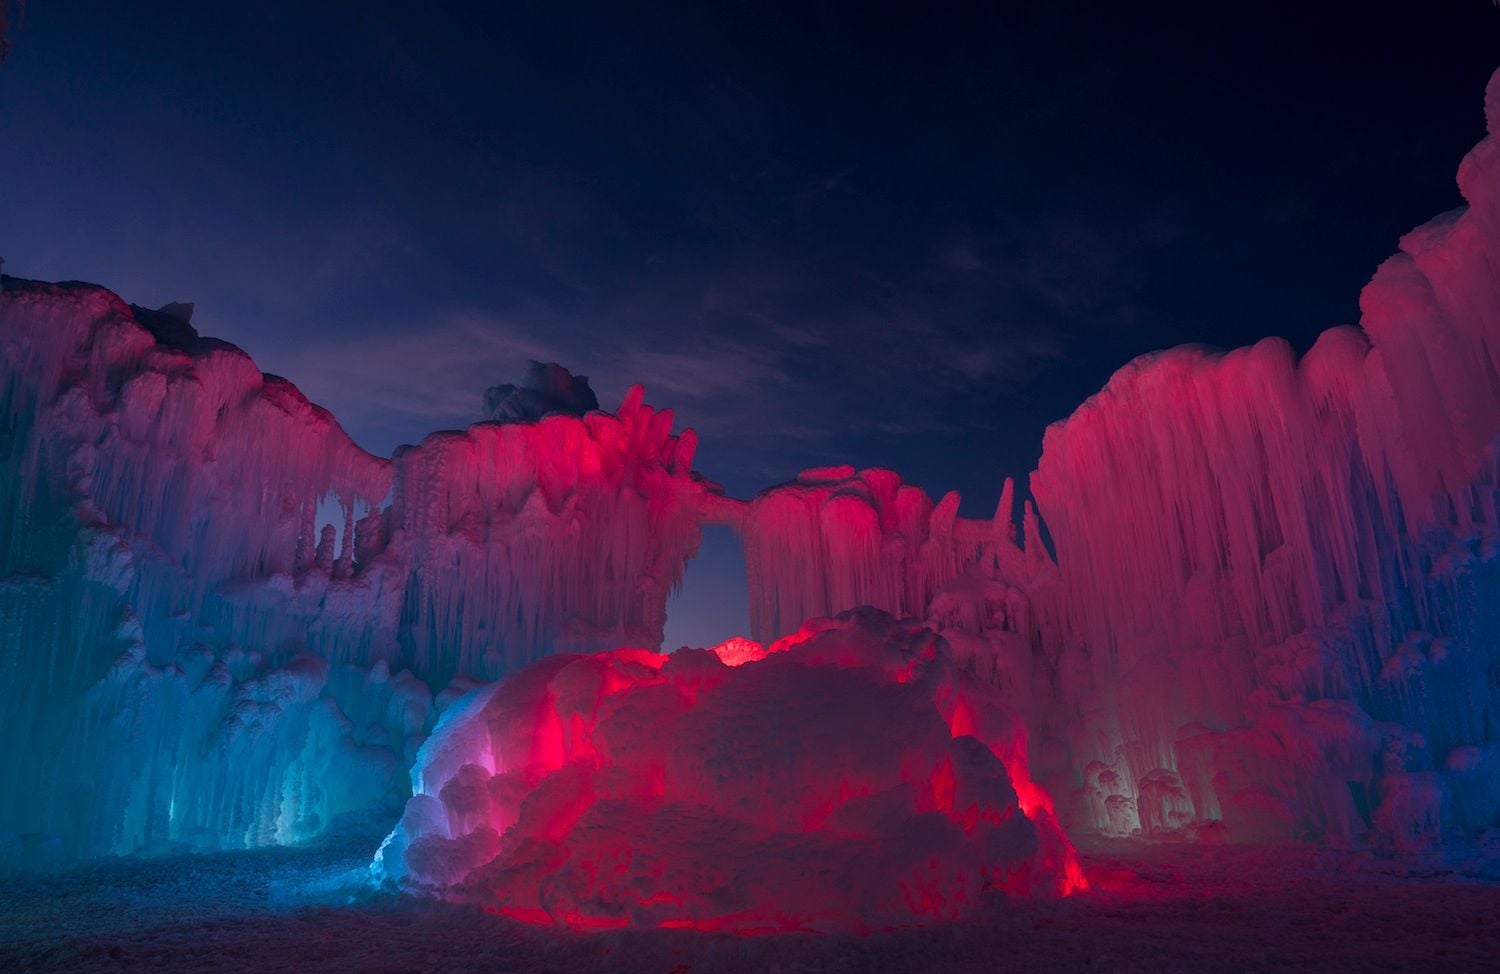 These Enchanting Ice Castles Add Wonder to a COVID Winter